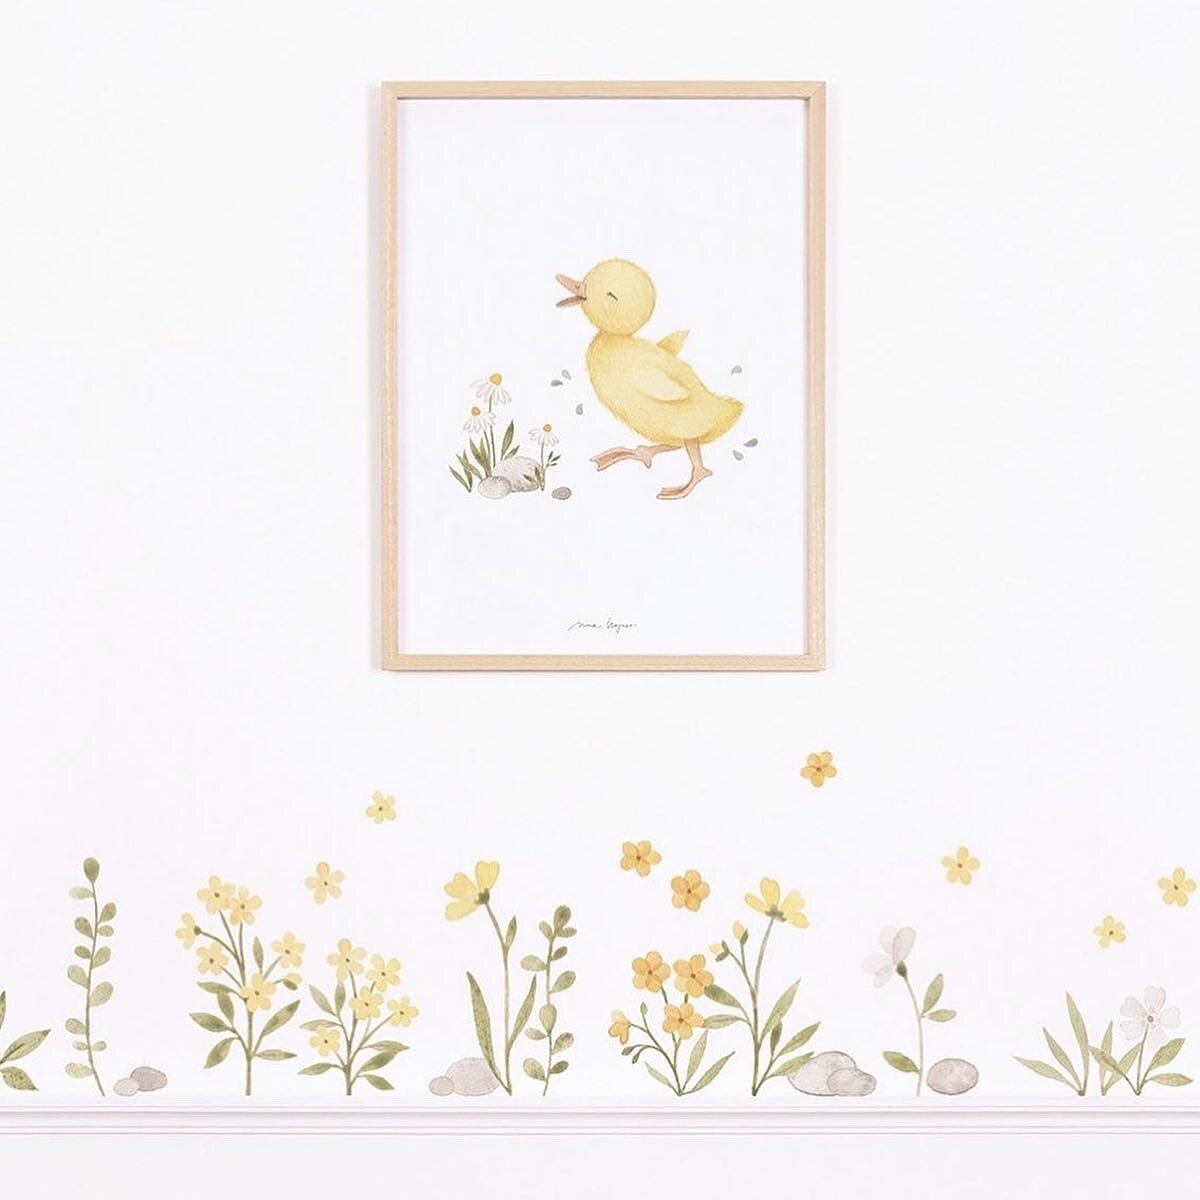 🐣Happy Friday lil&rsquo; ducks 🦆💛 I&rsquo;m super excited about &ldquo;Lucky Ducky&rdquo; collection I did exclusively for @lilipinso 🍀 It consist of wallpapers, many baby duck + floral wall decals and a poster. I drew so many little ducks I was 